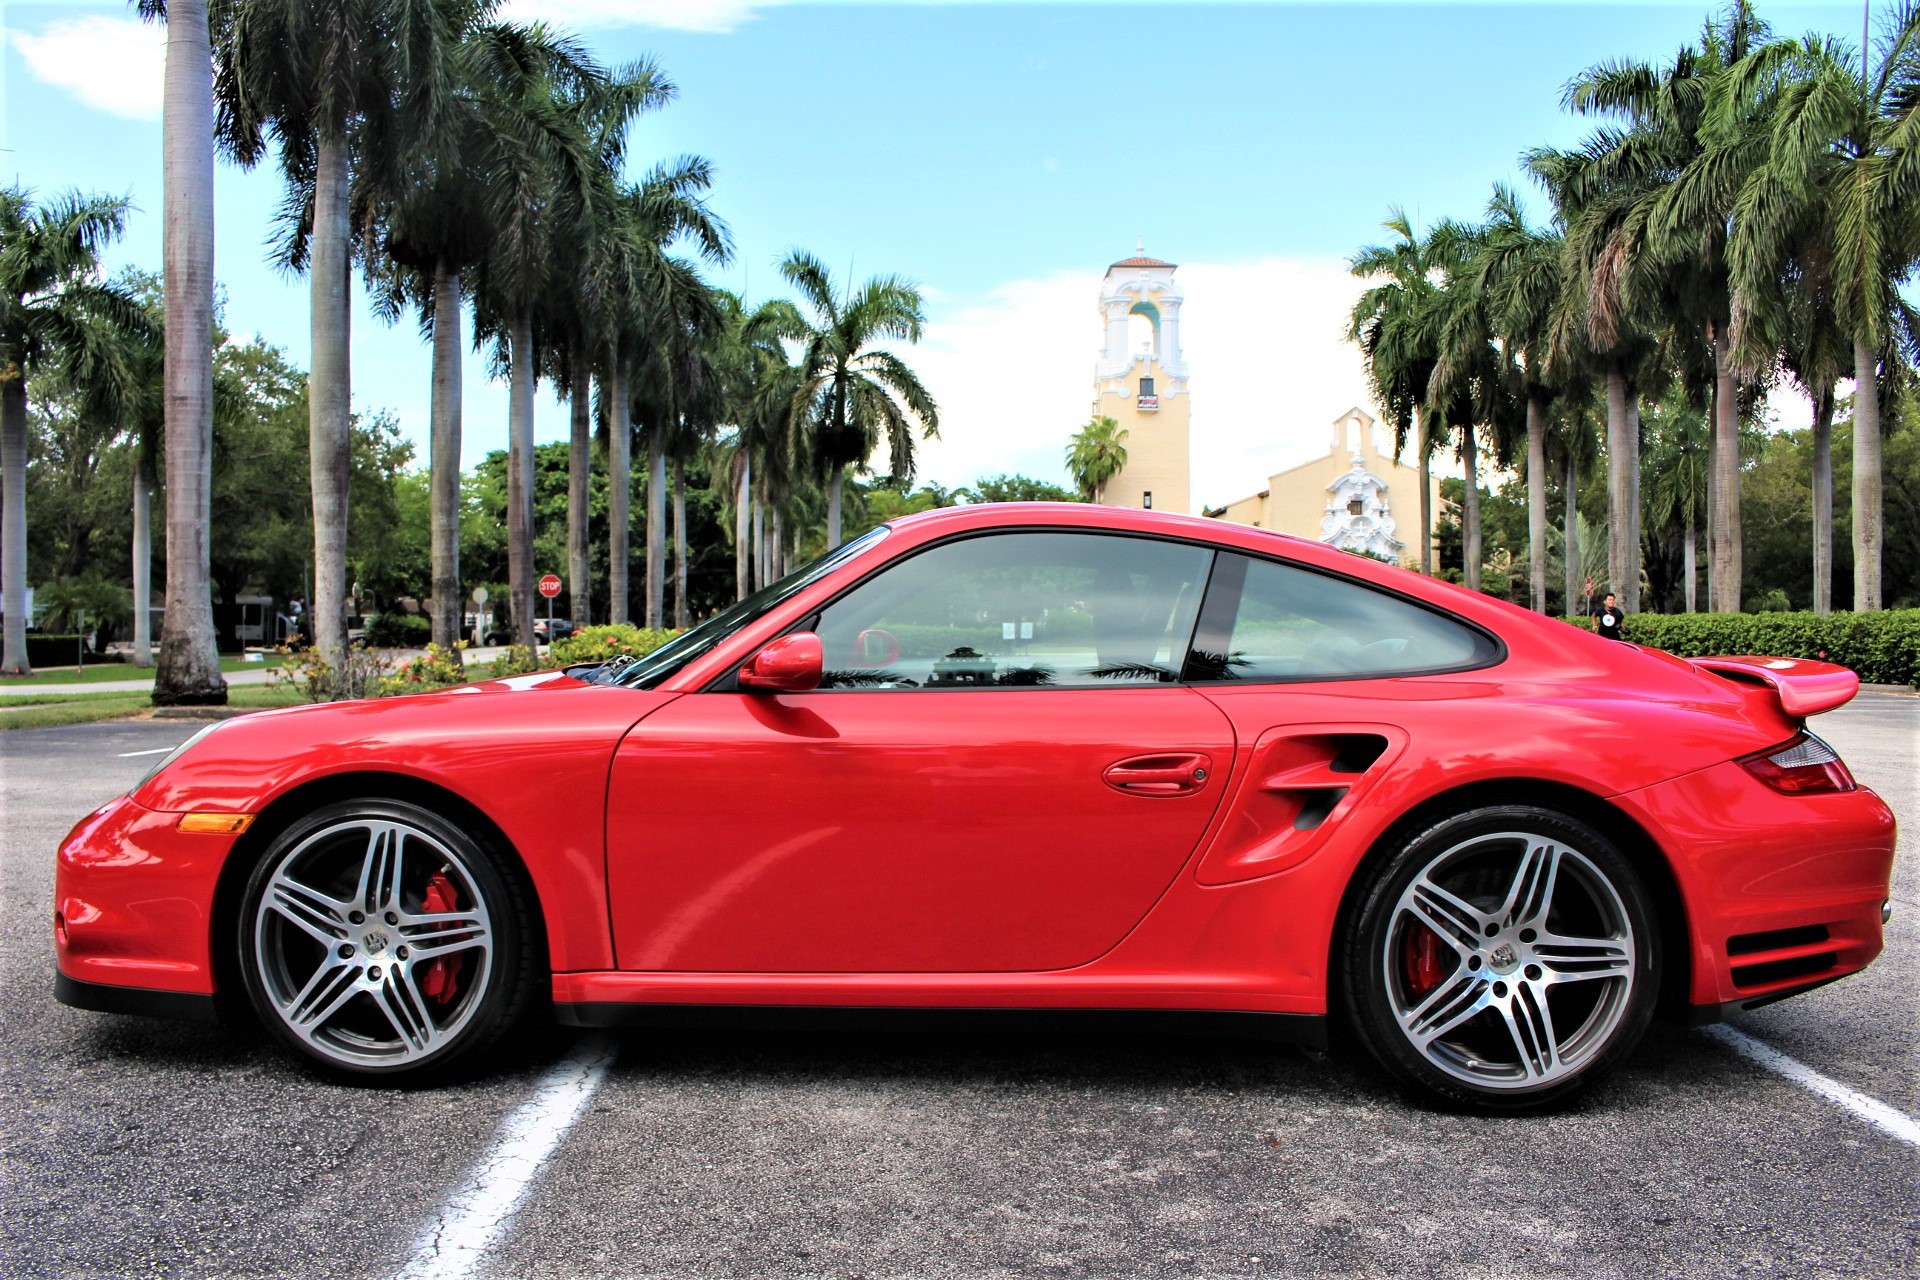 Used 2007 Porsche 911 Turbo for sale Sold at The Gables Sports Cars in Miami FL 33146 2